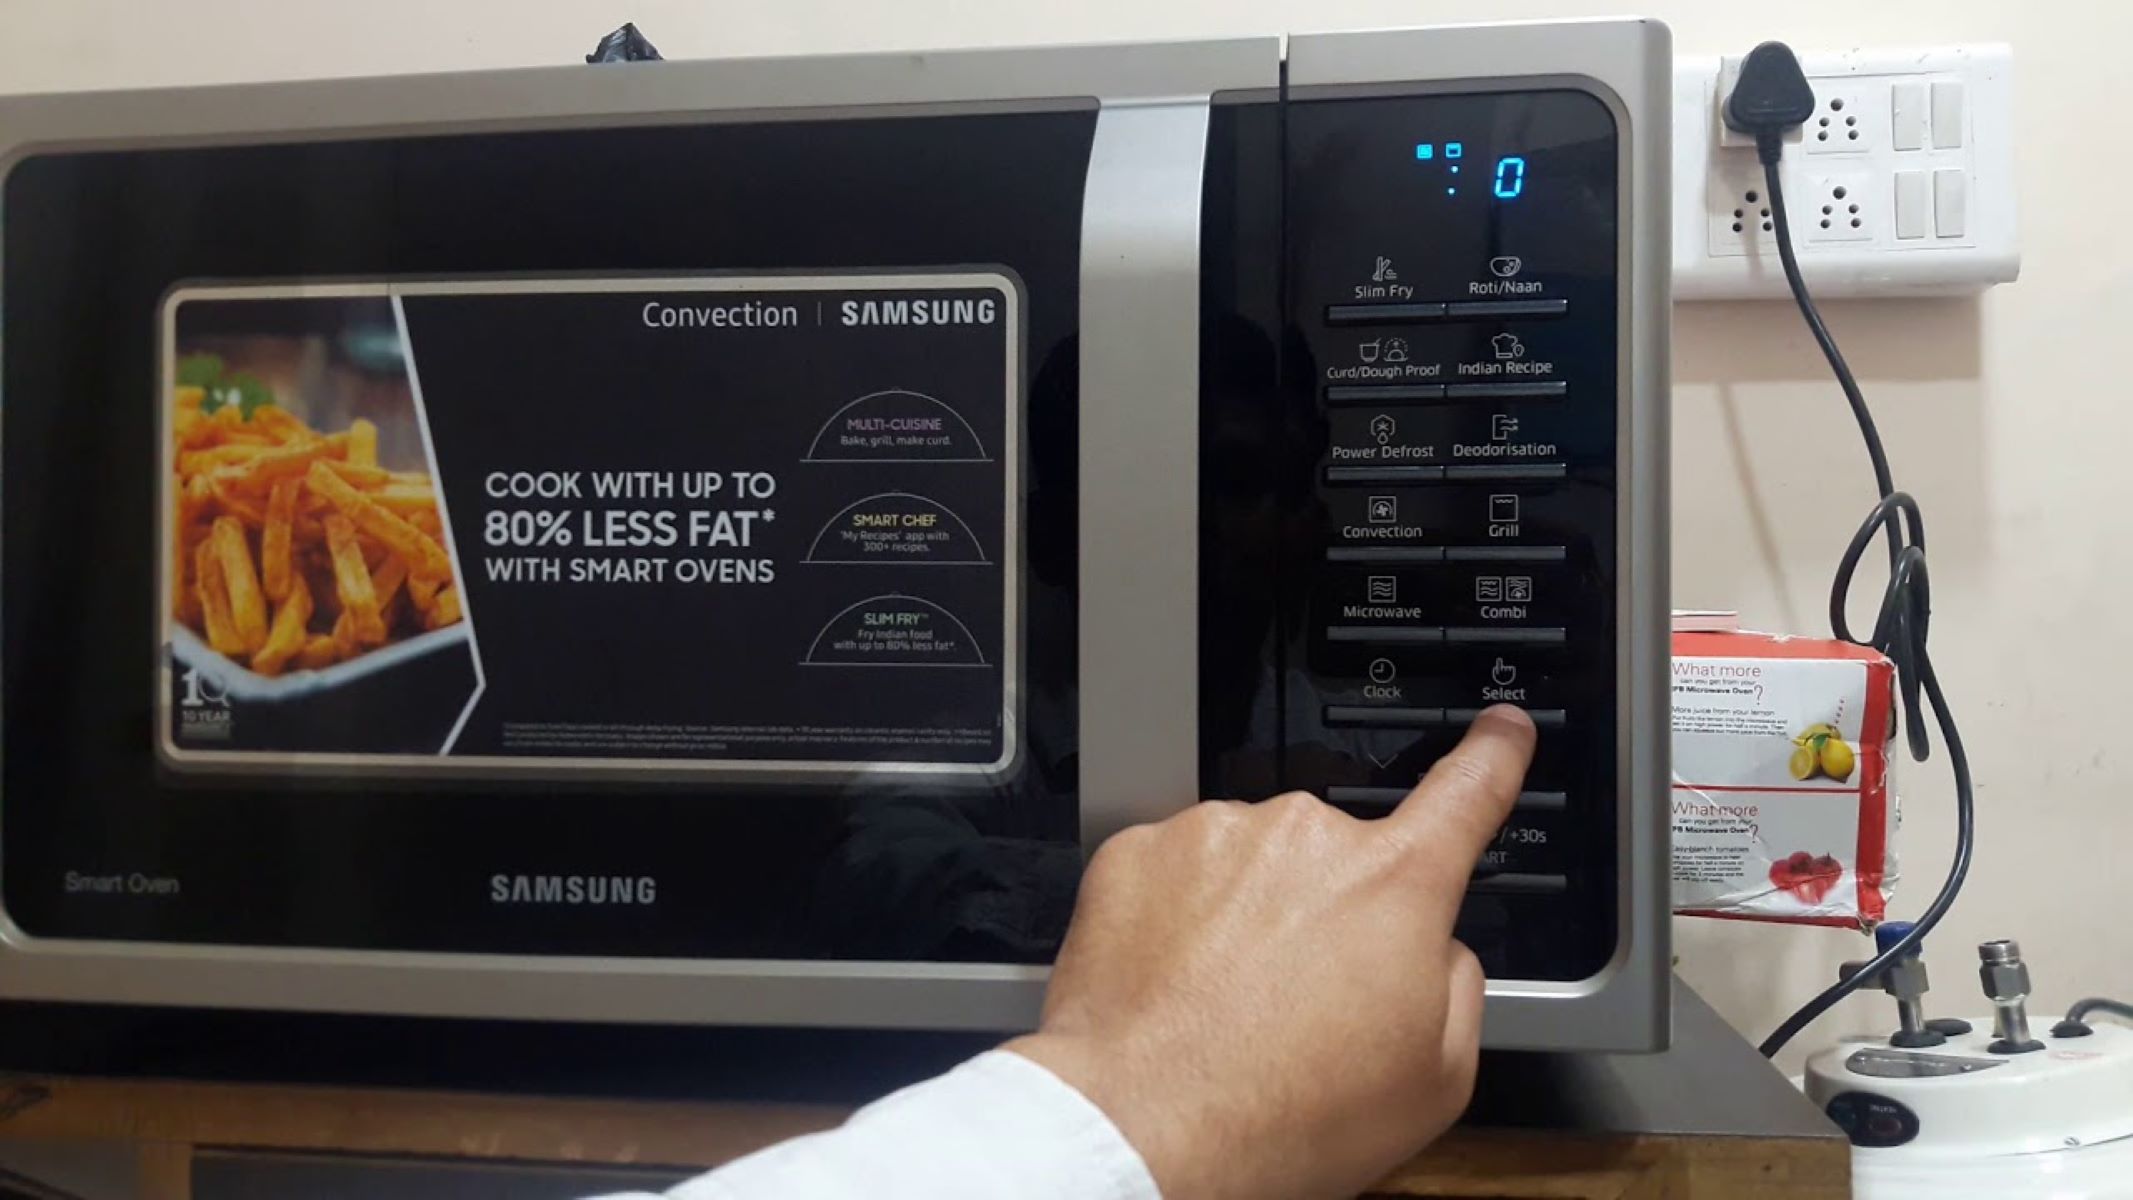 How To Fix The Error Code E-83 For Samsung Convection Oven